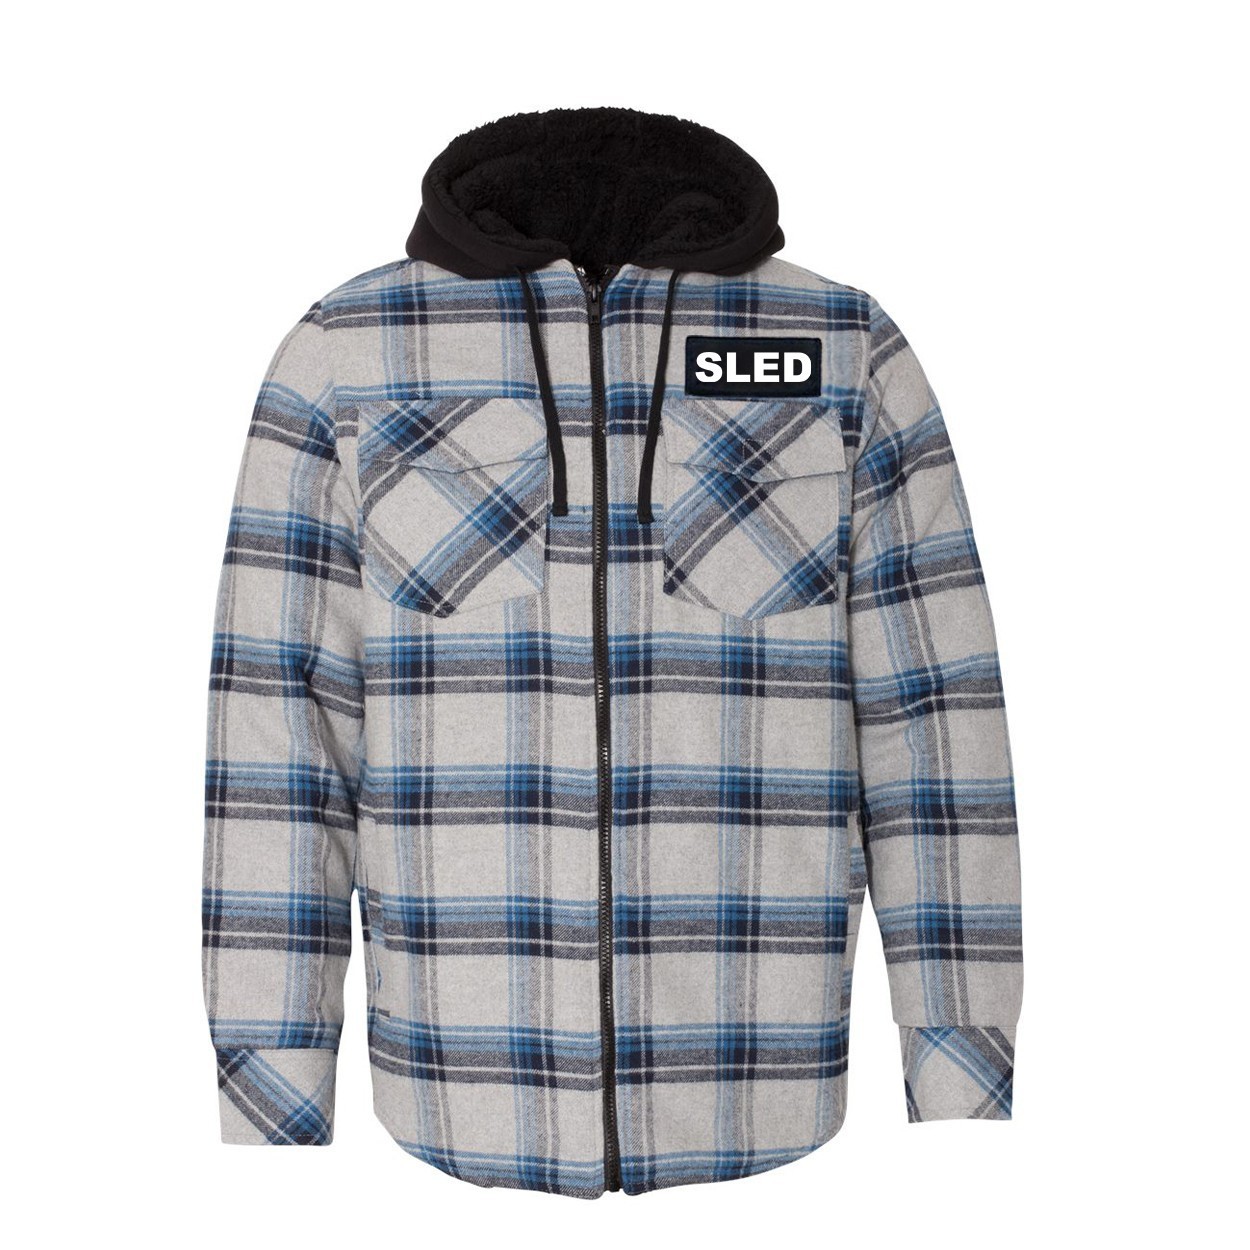 Sled Brand Logo Classic Unisex Full Zip Woven Patch Hooded Flannel Jacket Gray/ Blue